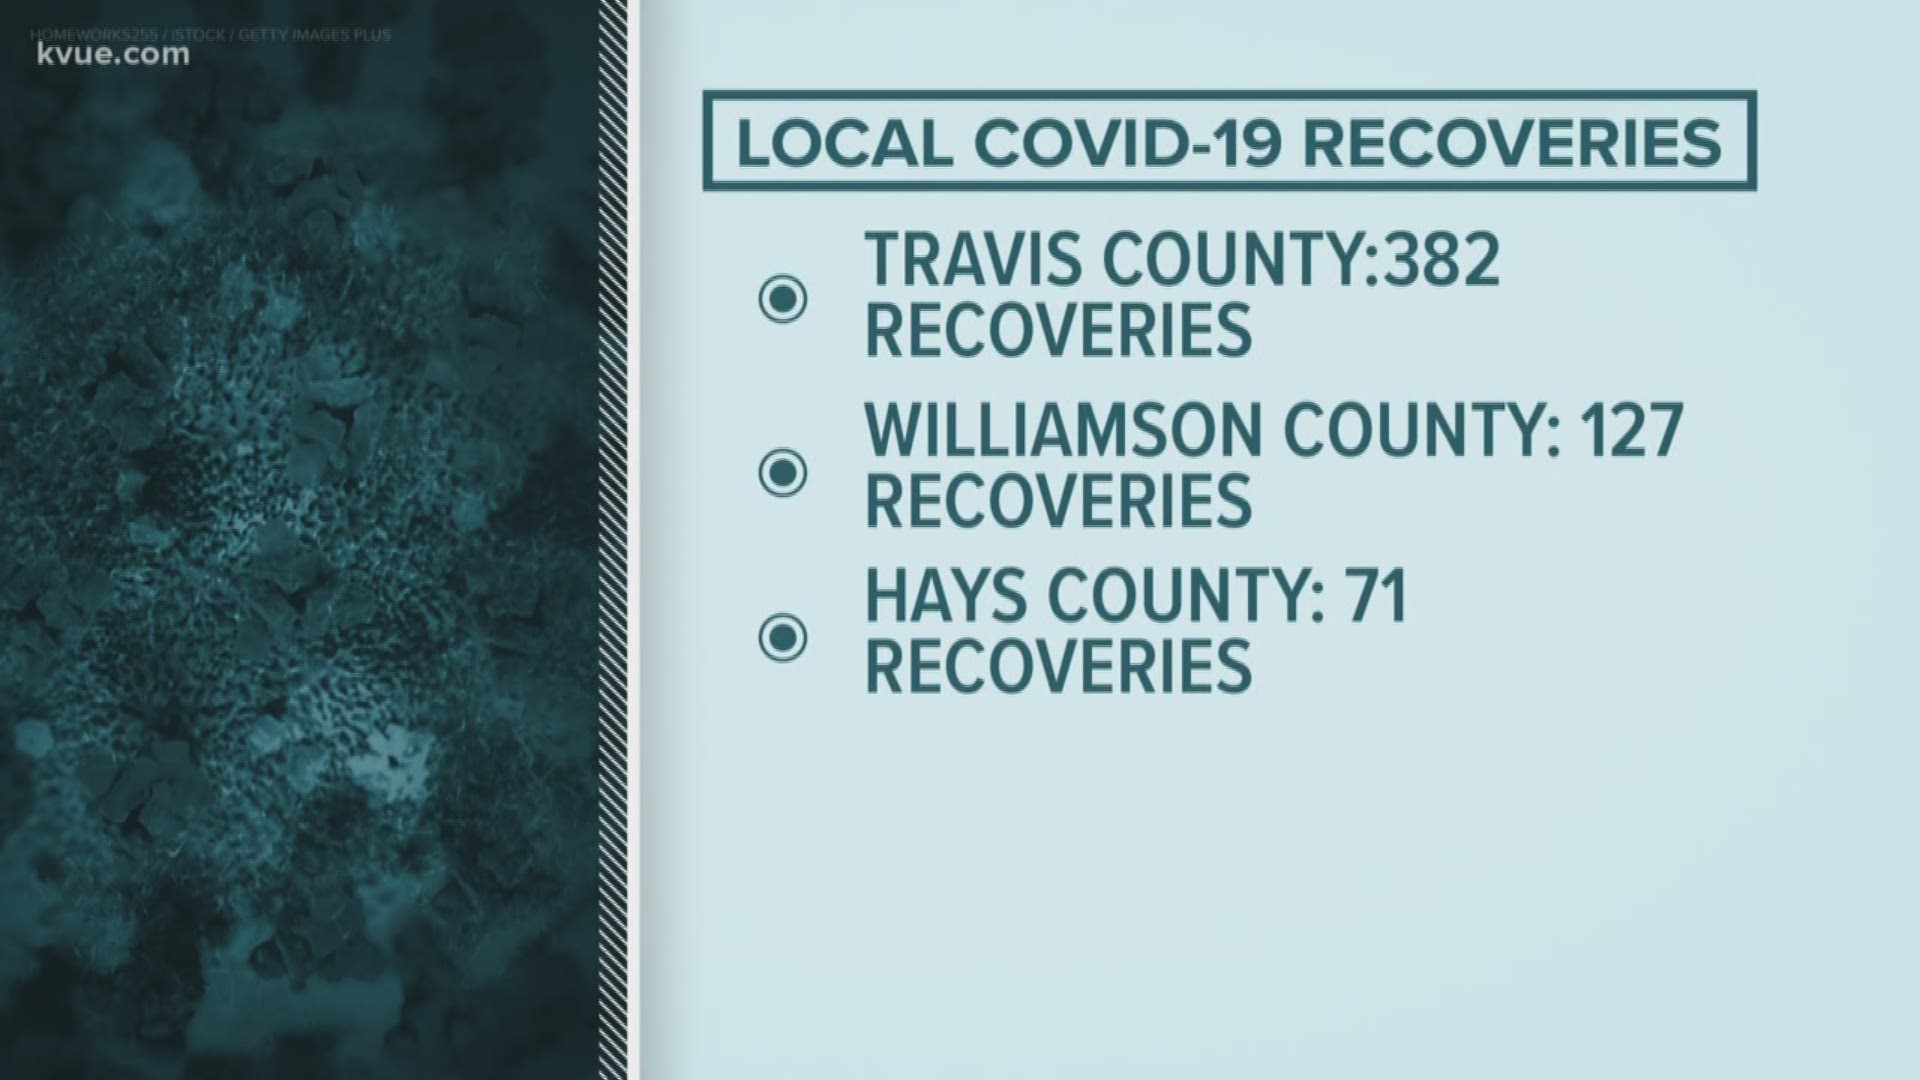 Four more deaths from the virus were reported in Travis County on Saturday.